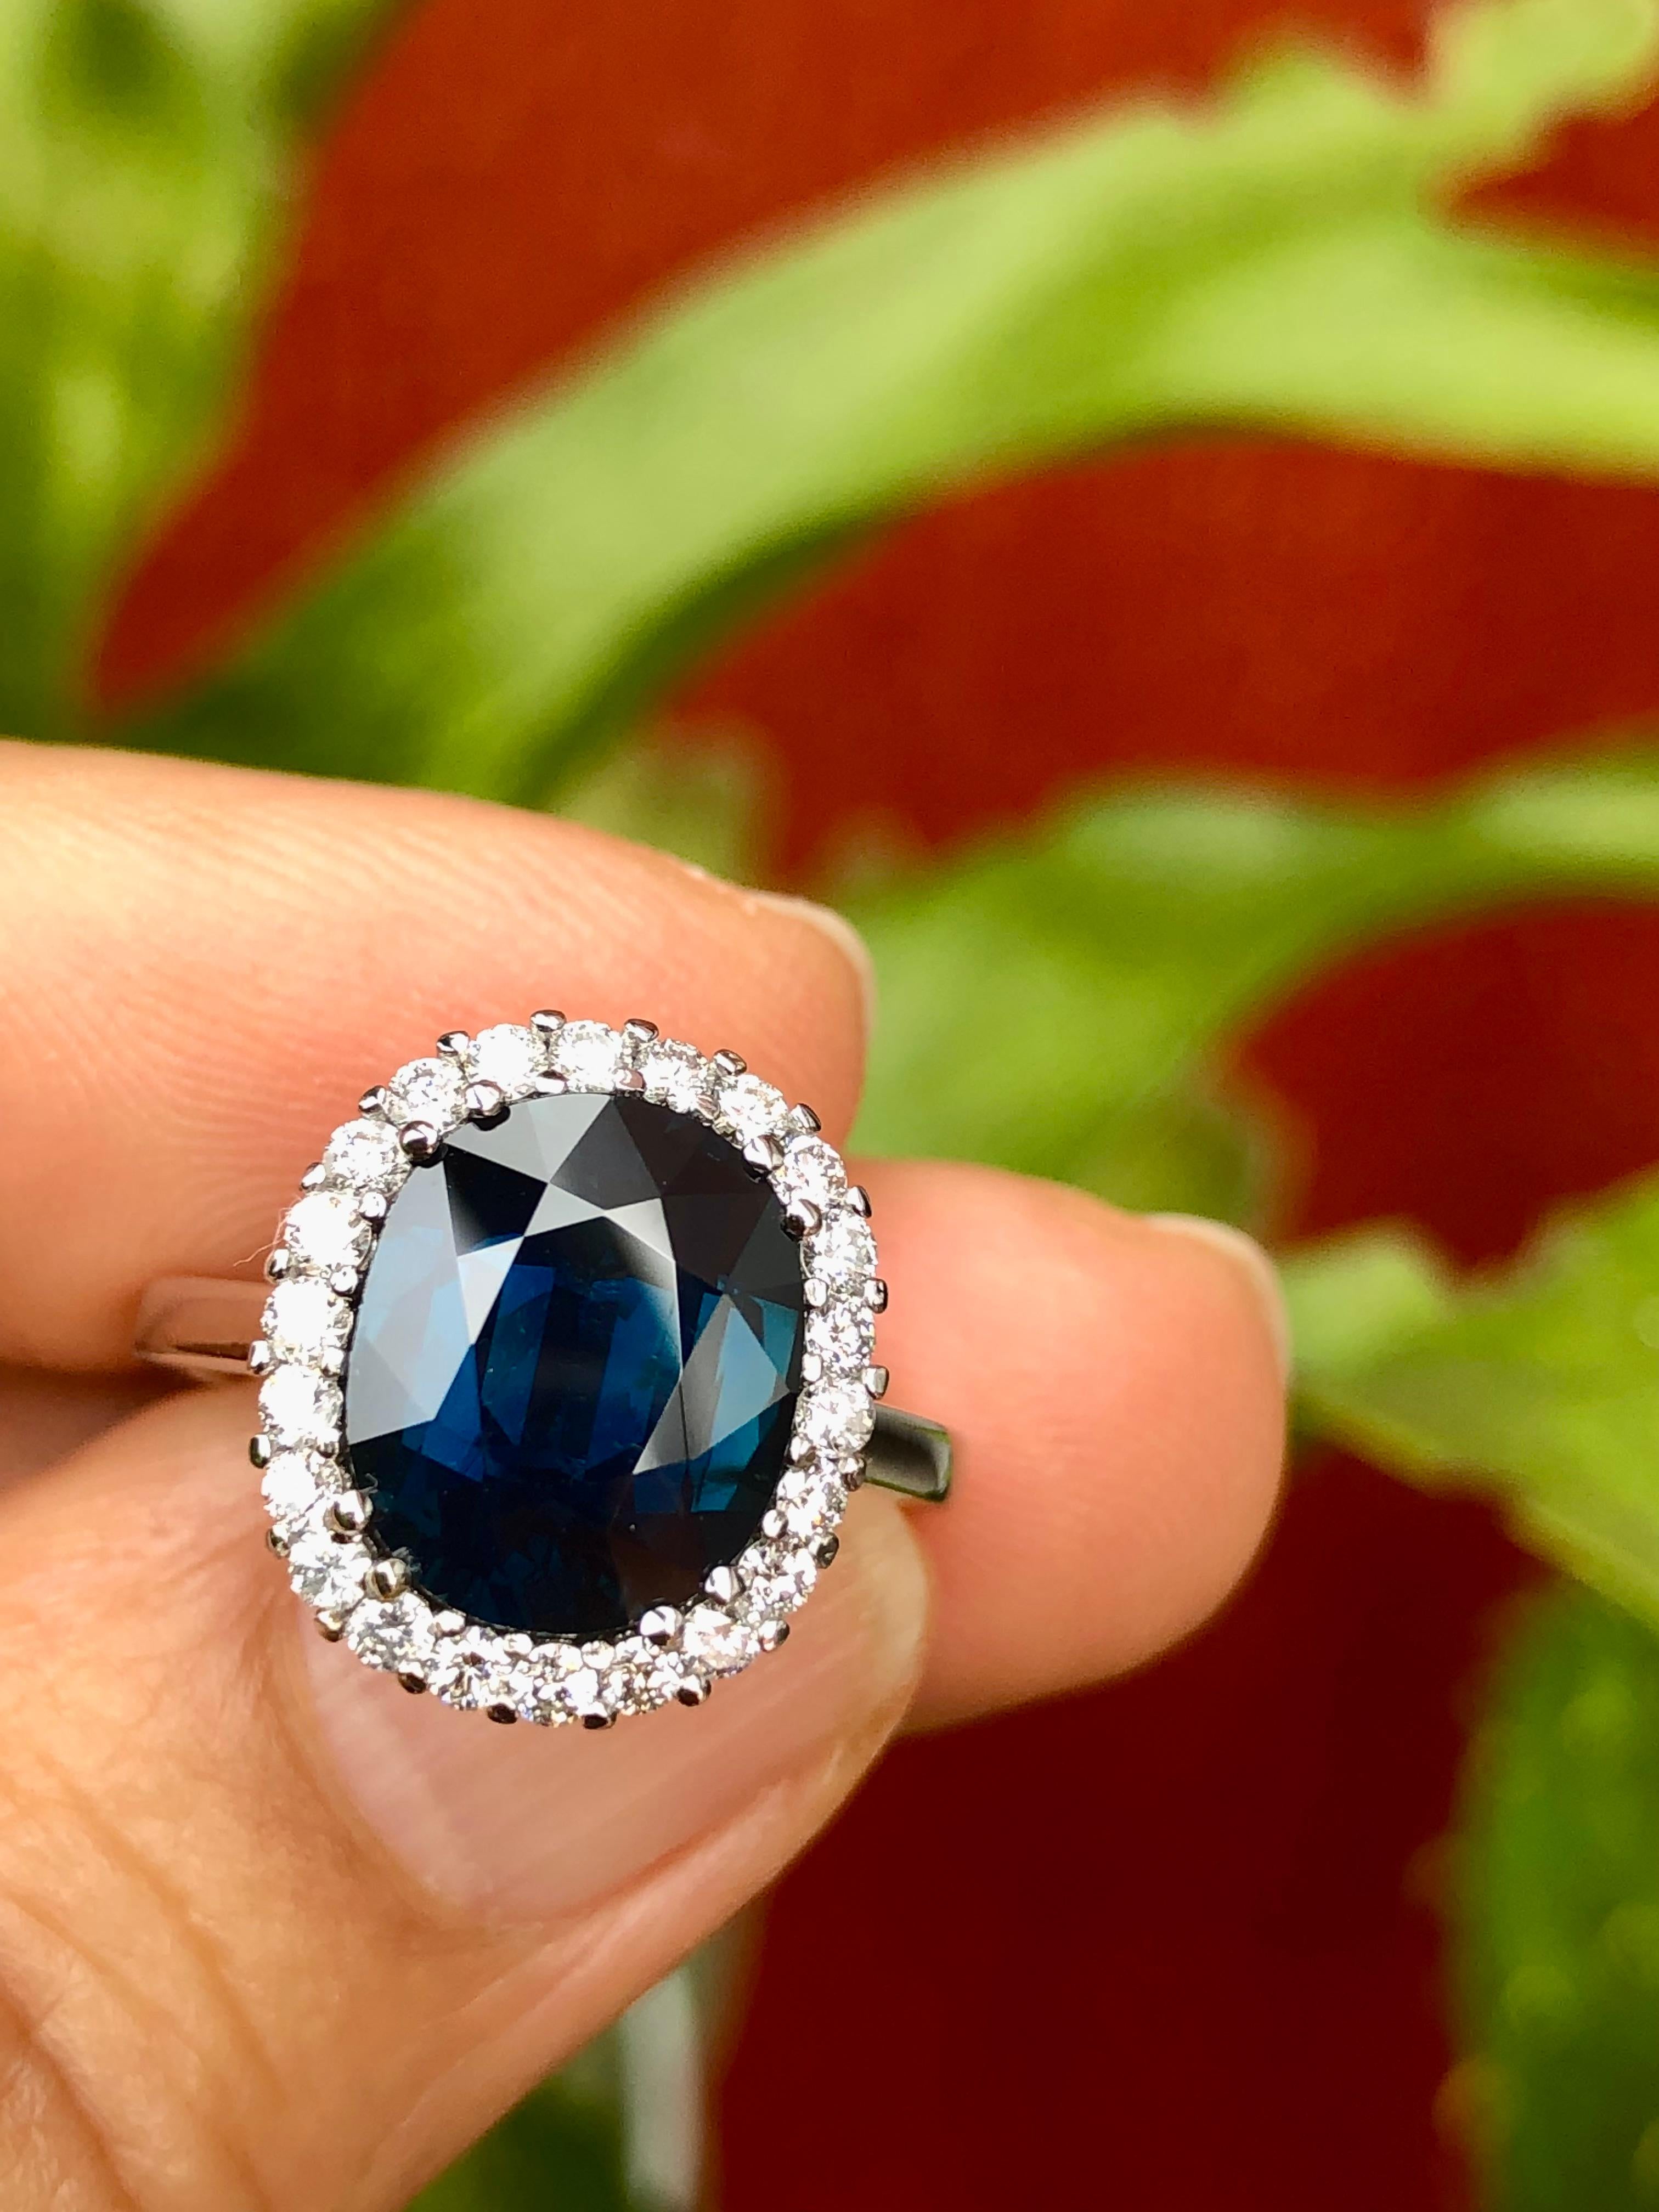 A beautiful oval cut no heat natural sapphire diamond halo engagement ring set in 18k white gold. The ring design highlights an oval-cut 5.31 carat no heat sapphire midnight blue color. This sapphire is then haloed by round brilliant cut diamonds